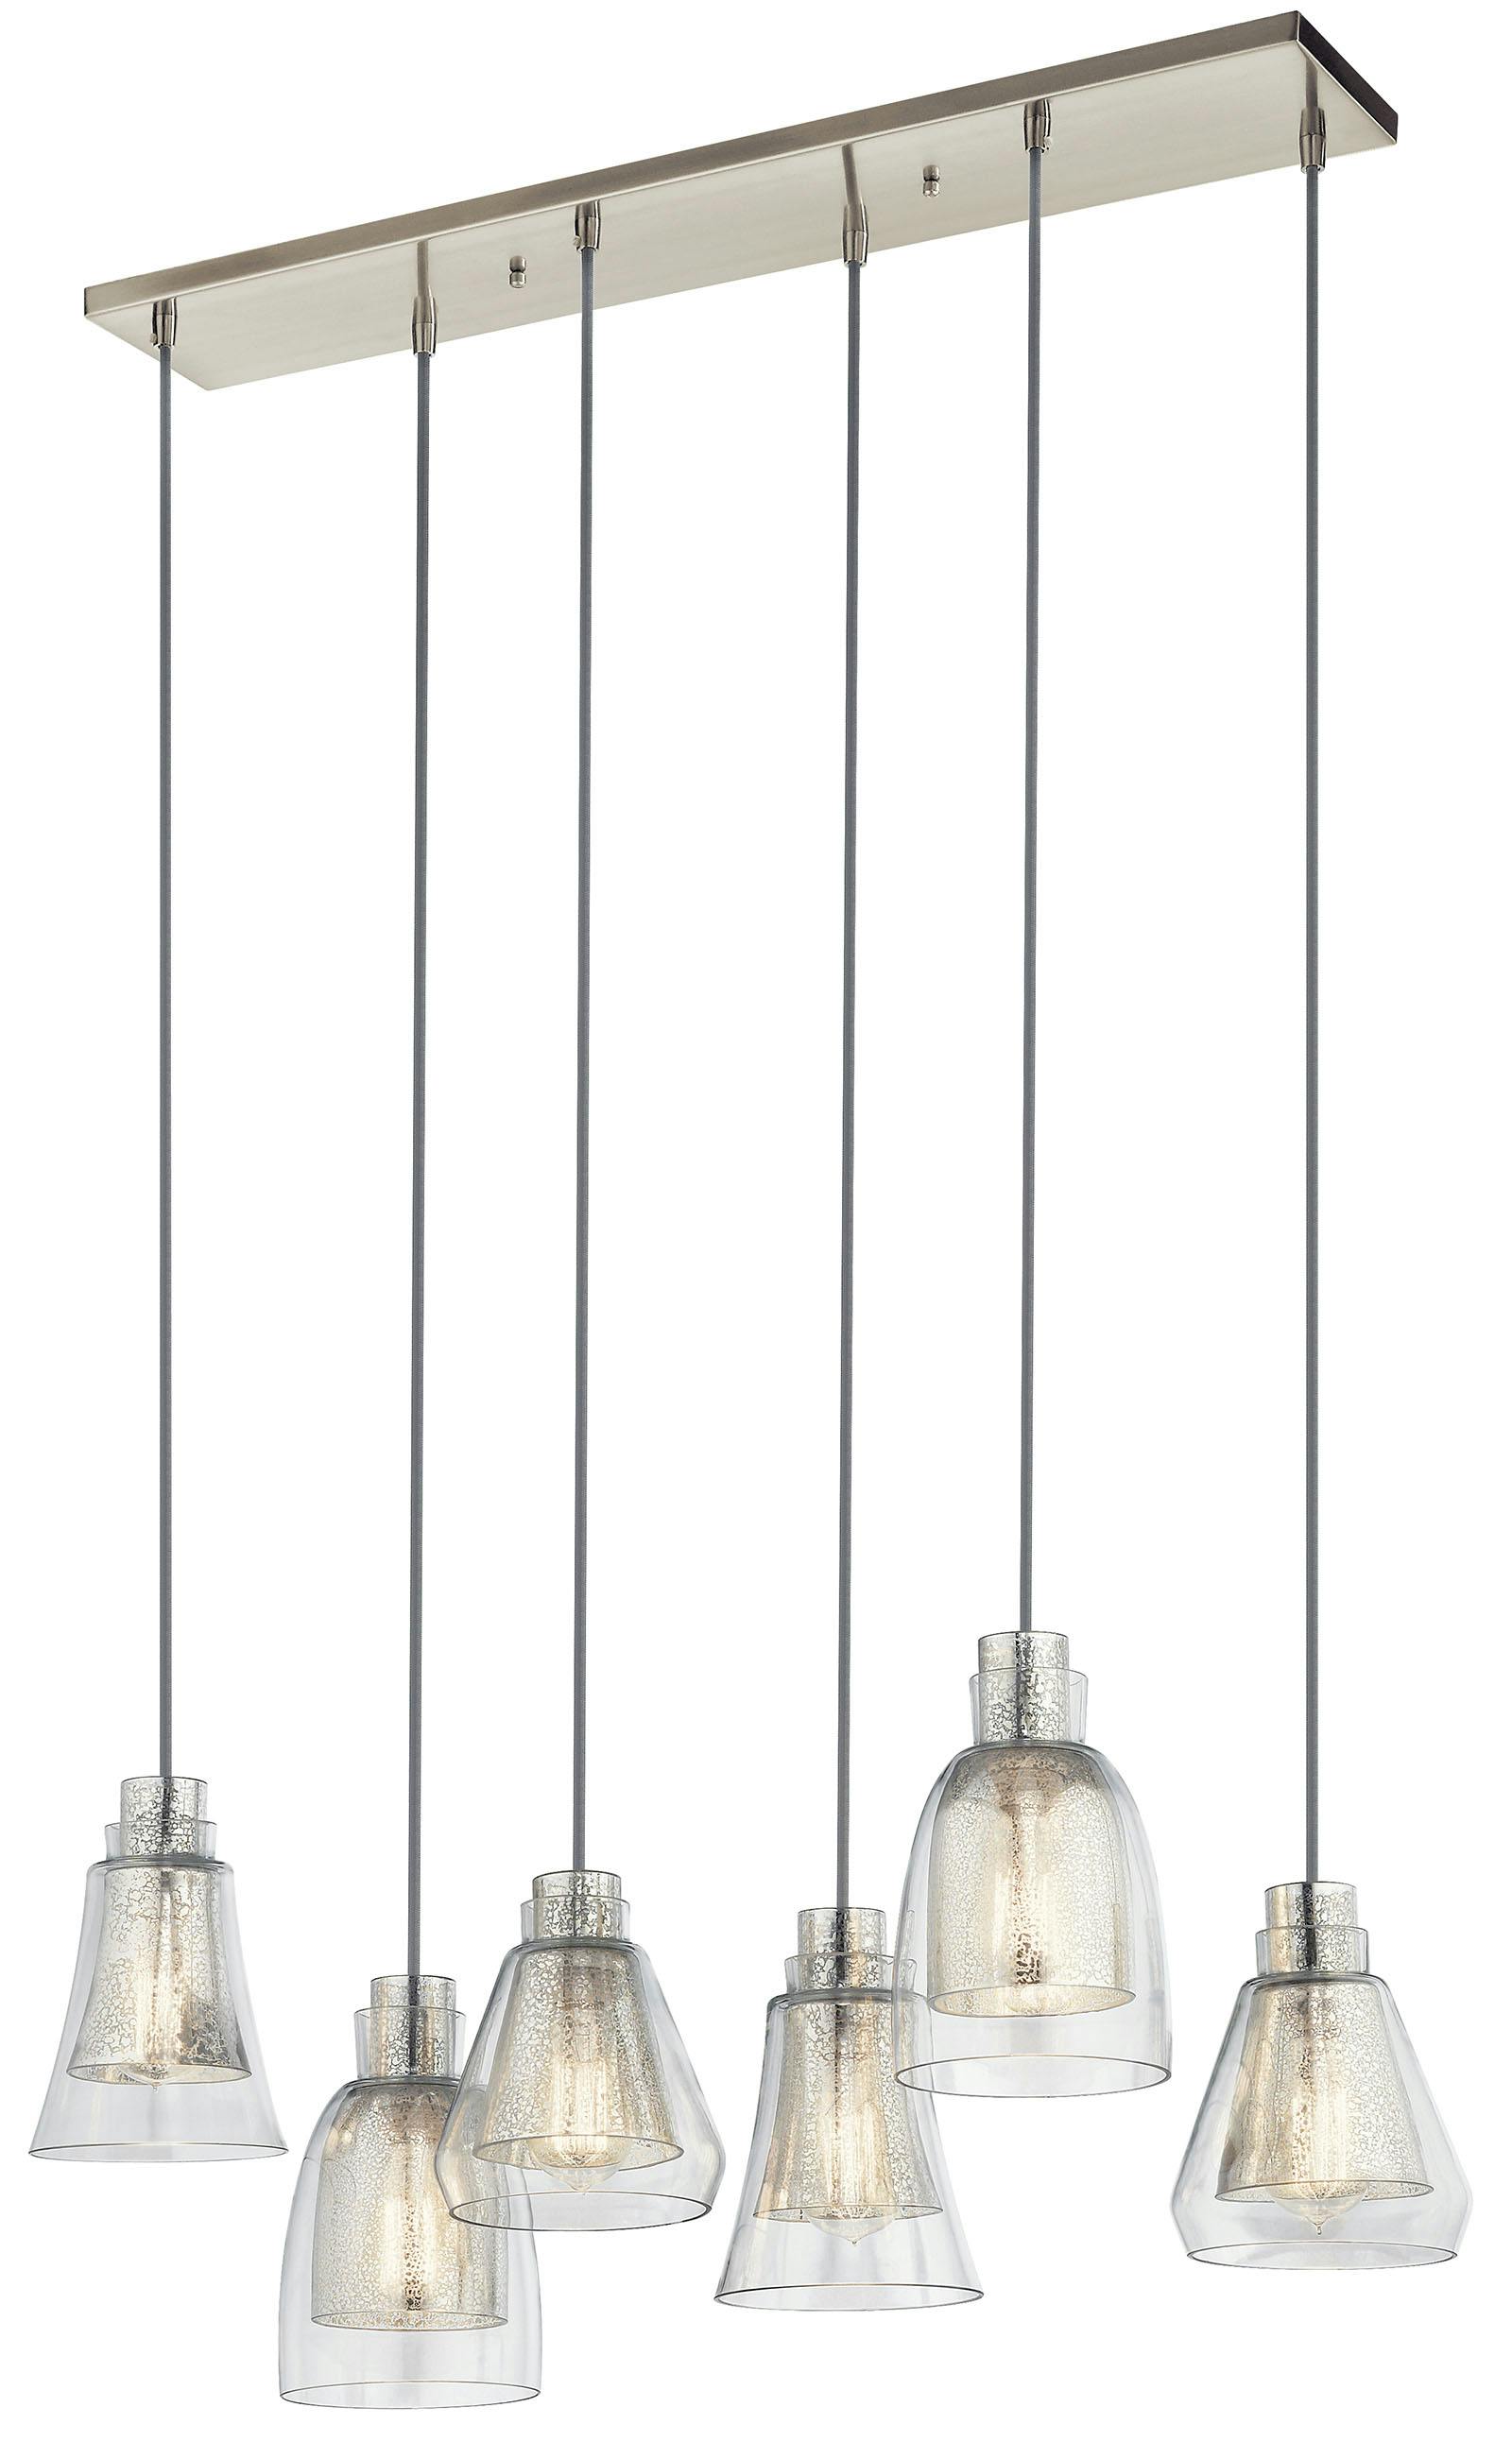 Evie 6 Light Chandelier Brushed Nickel on a white background